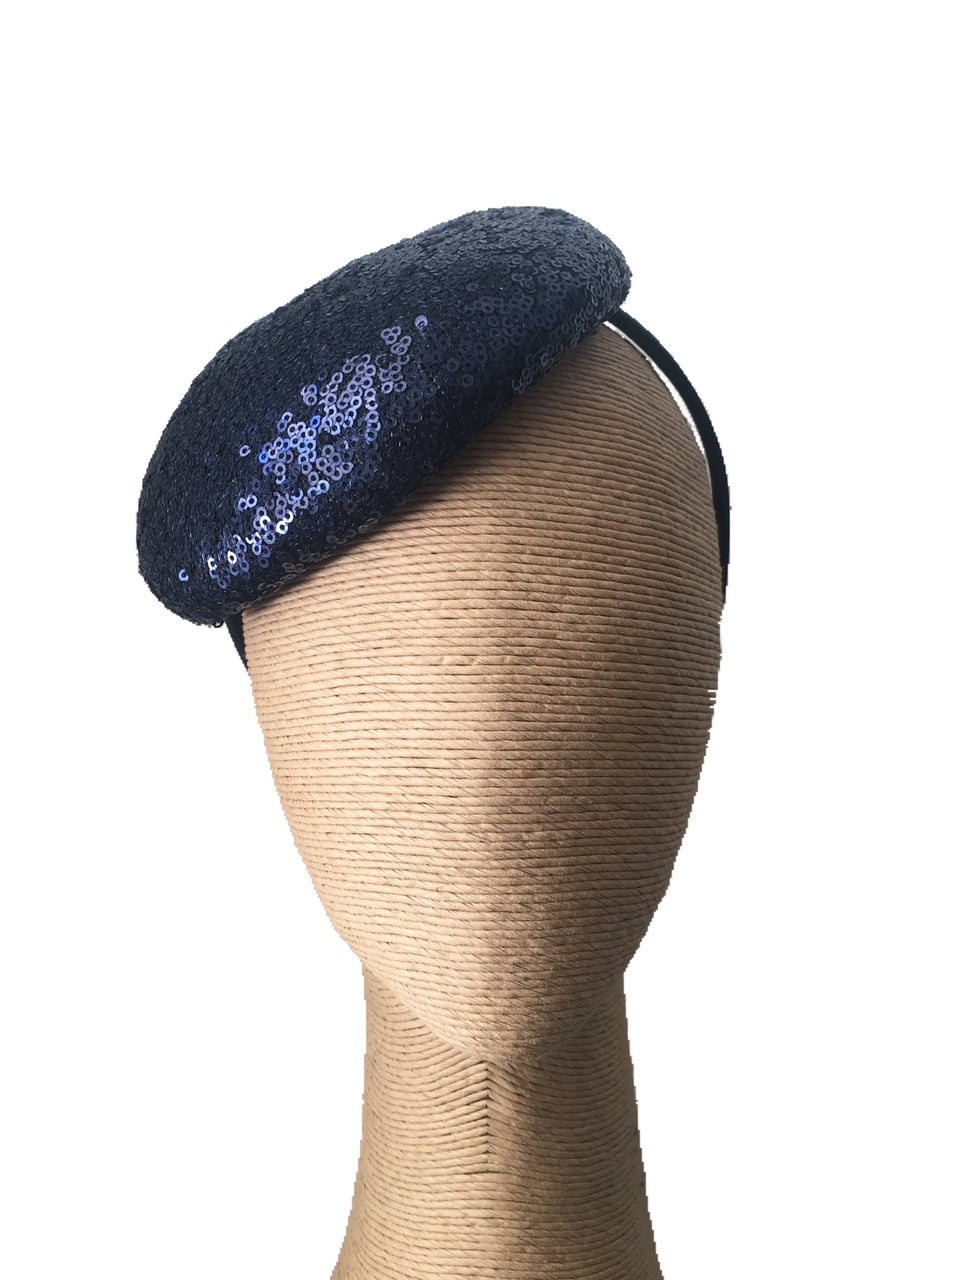 Max Alexander Lily Sequinned Hat in Navy on a Headband